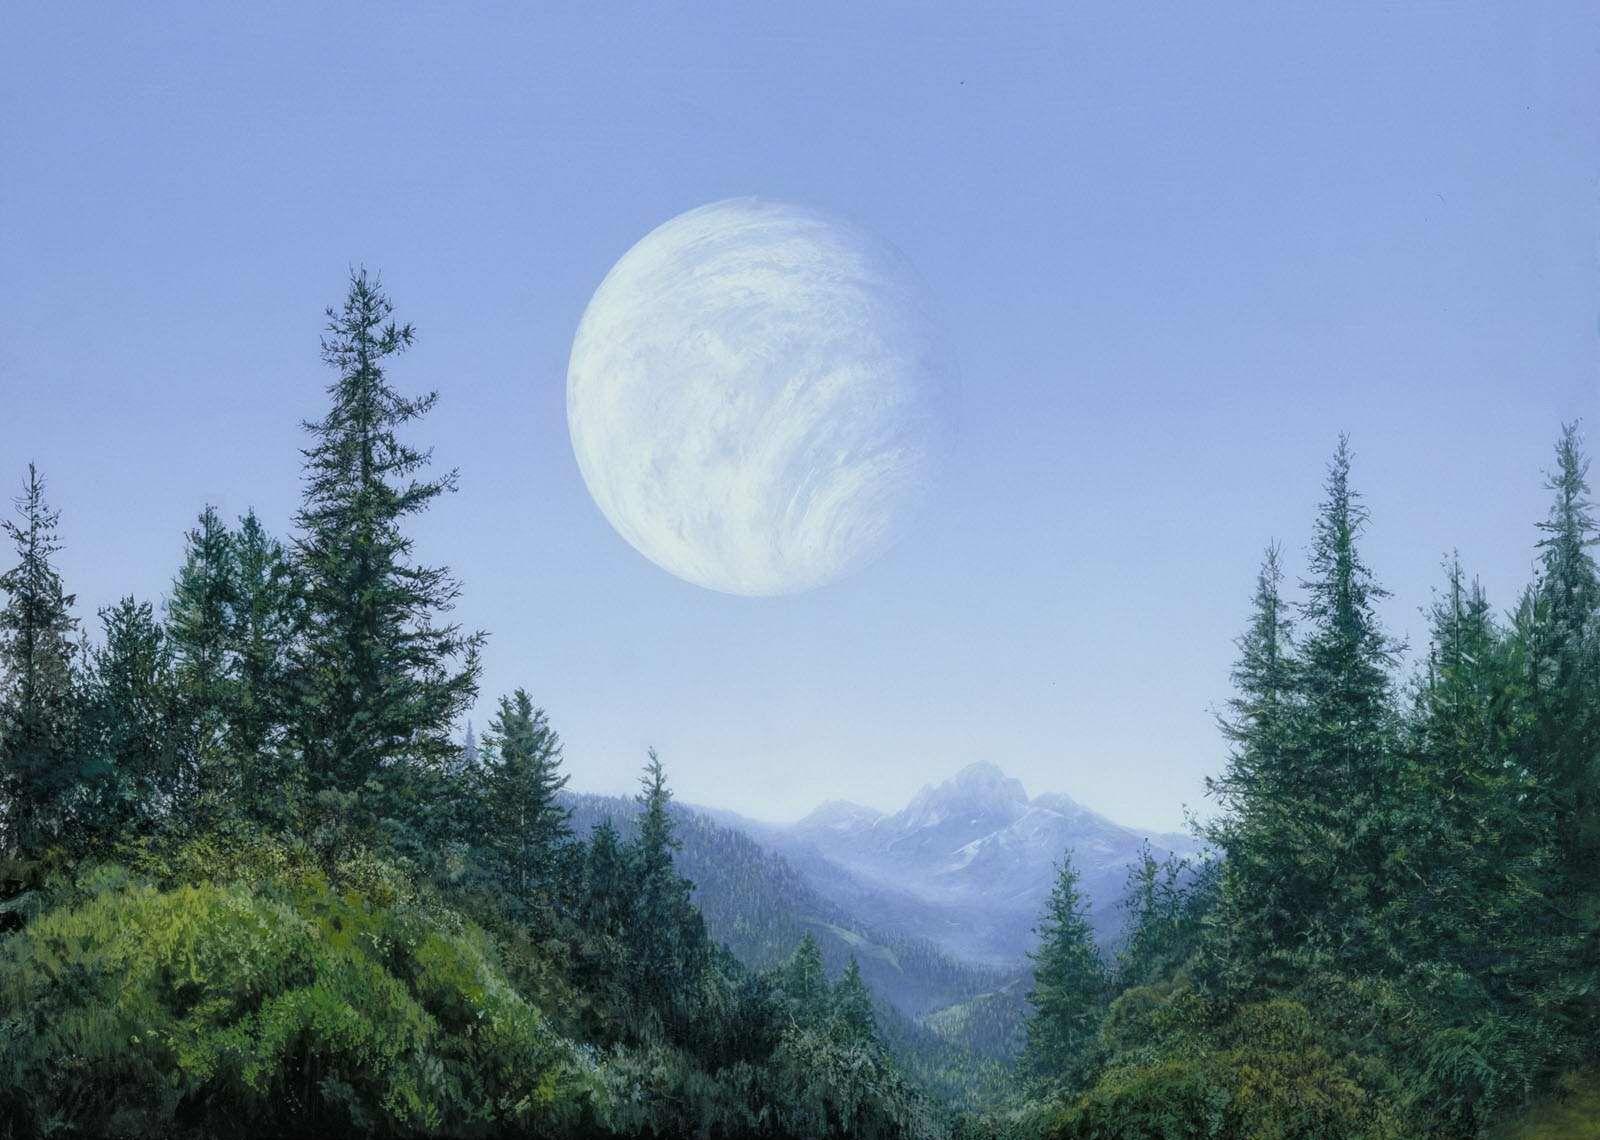 A landscape of the Forest Moon of Endor, as seen in Return